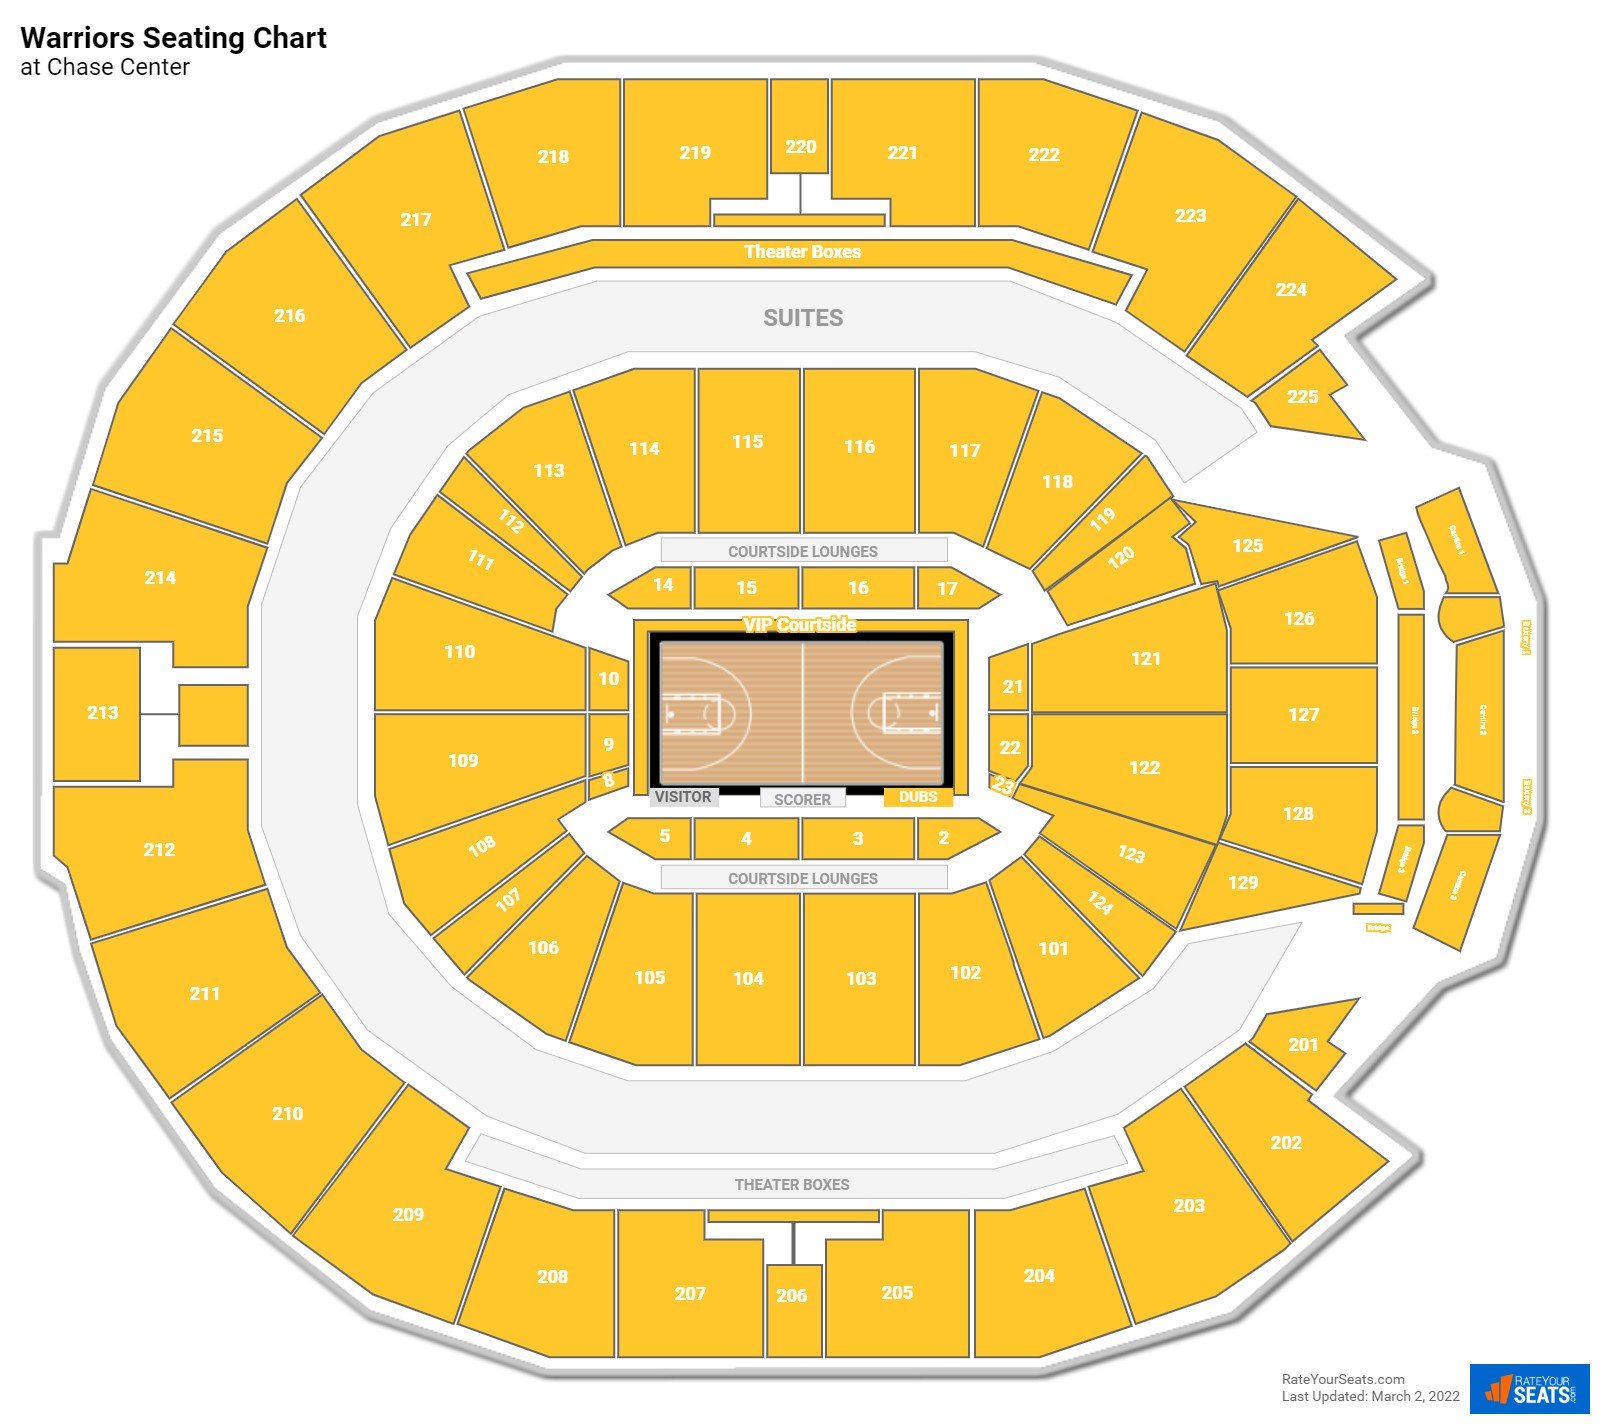 Golden State Warriors Seating Chart at Chase Center